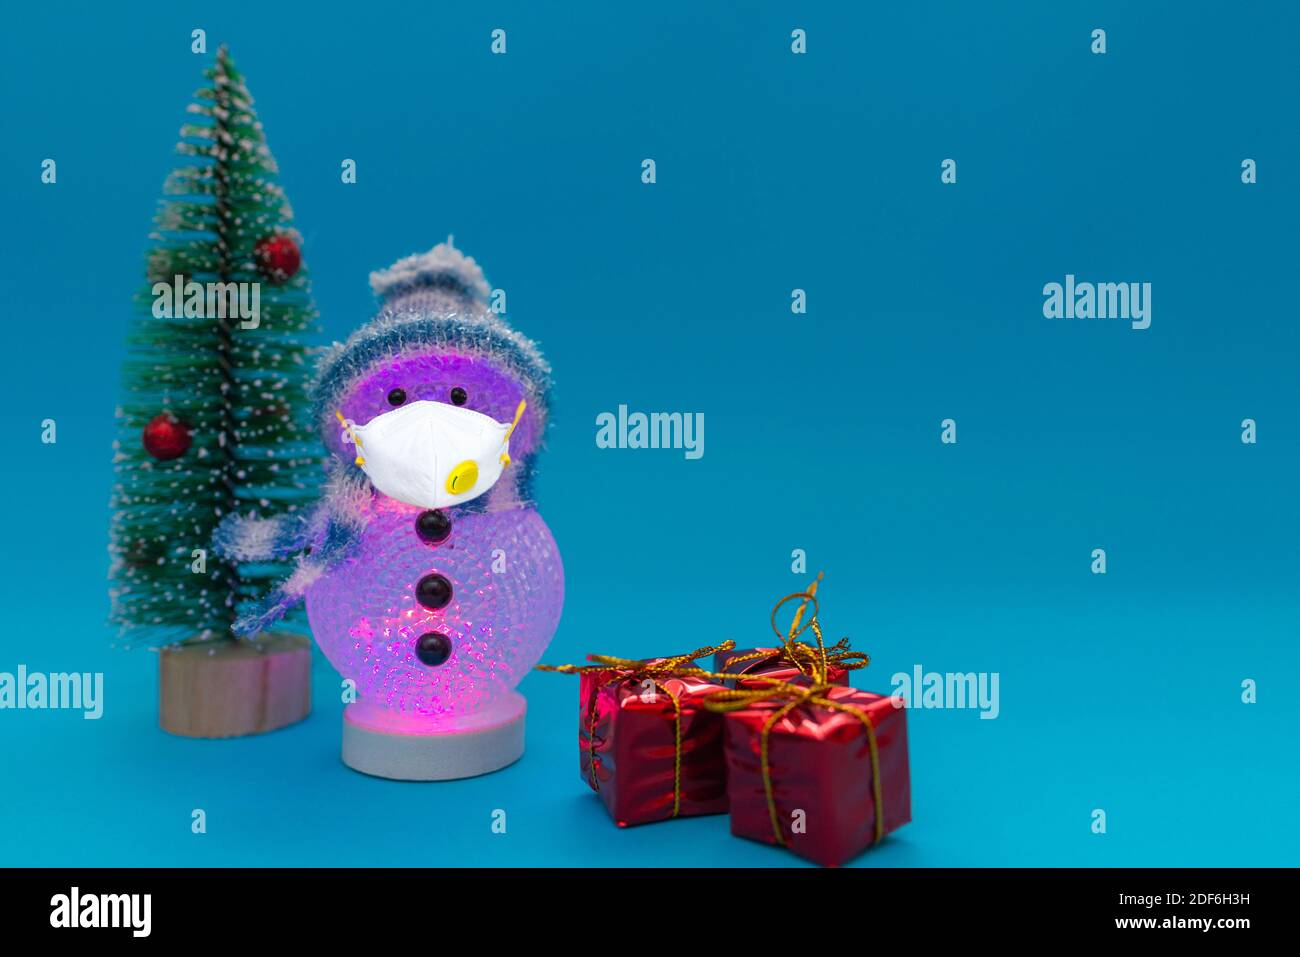 Glowing snowman at evening wears face mask, presents and Christmas tree with copy space.Christmas and new year celebration.Studio shot. Stock Photo